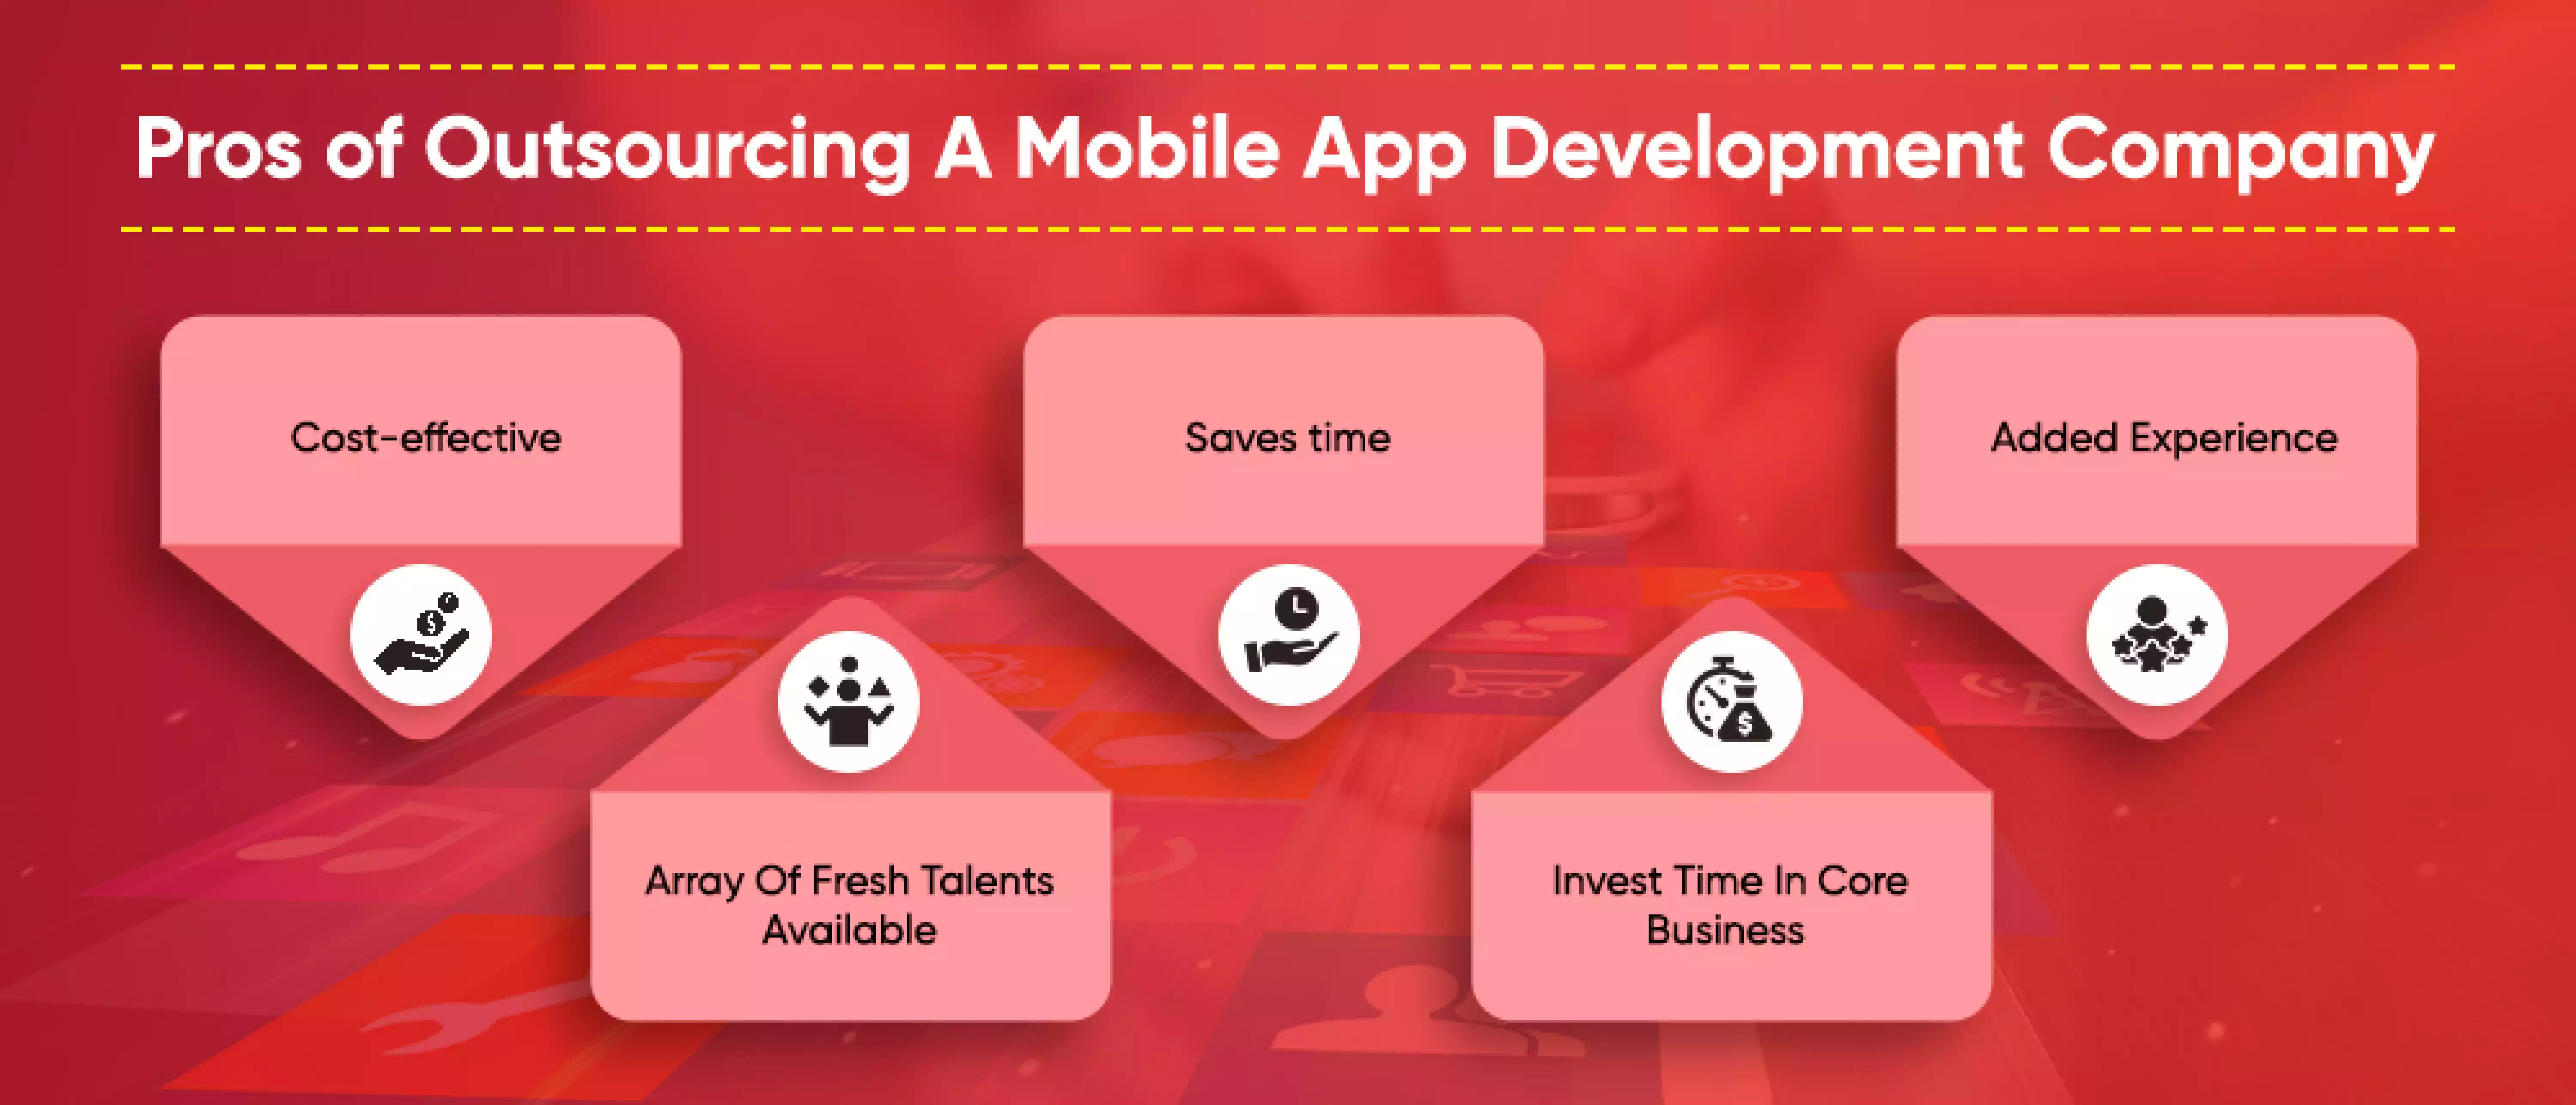 Pros of Outsourcing A Mobile App Development Company